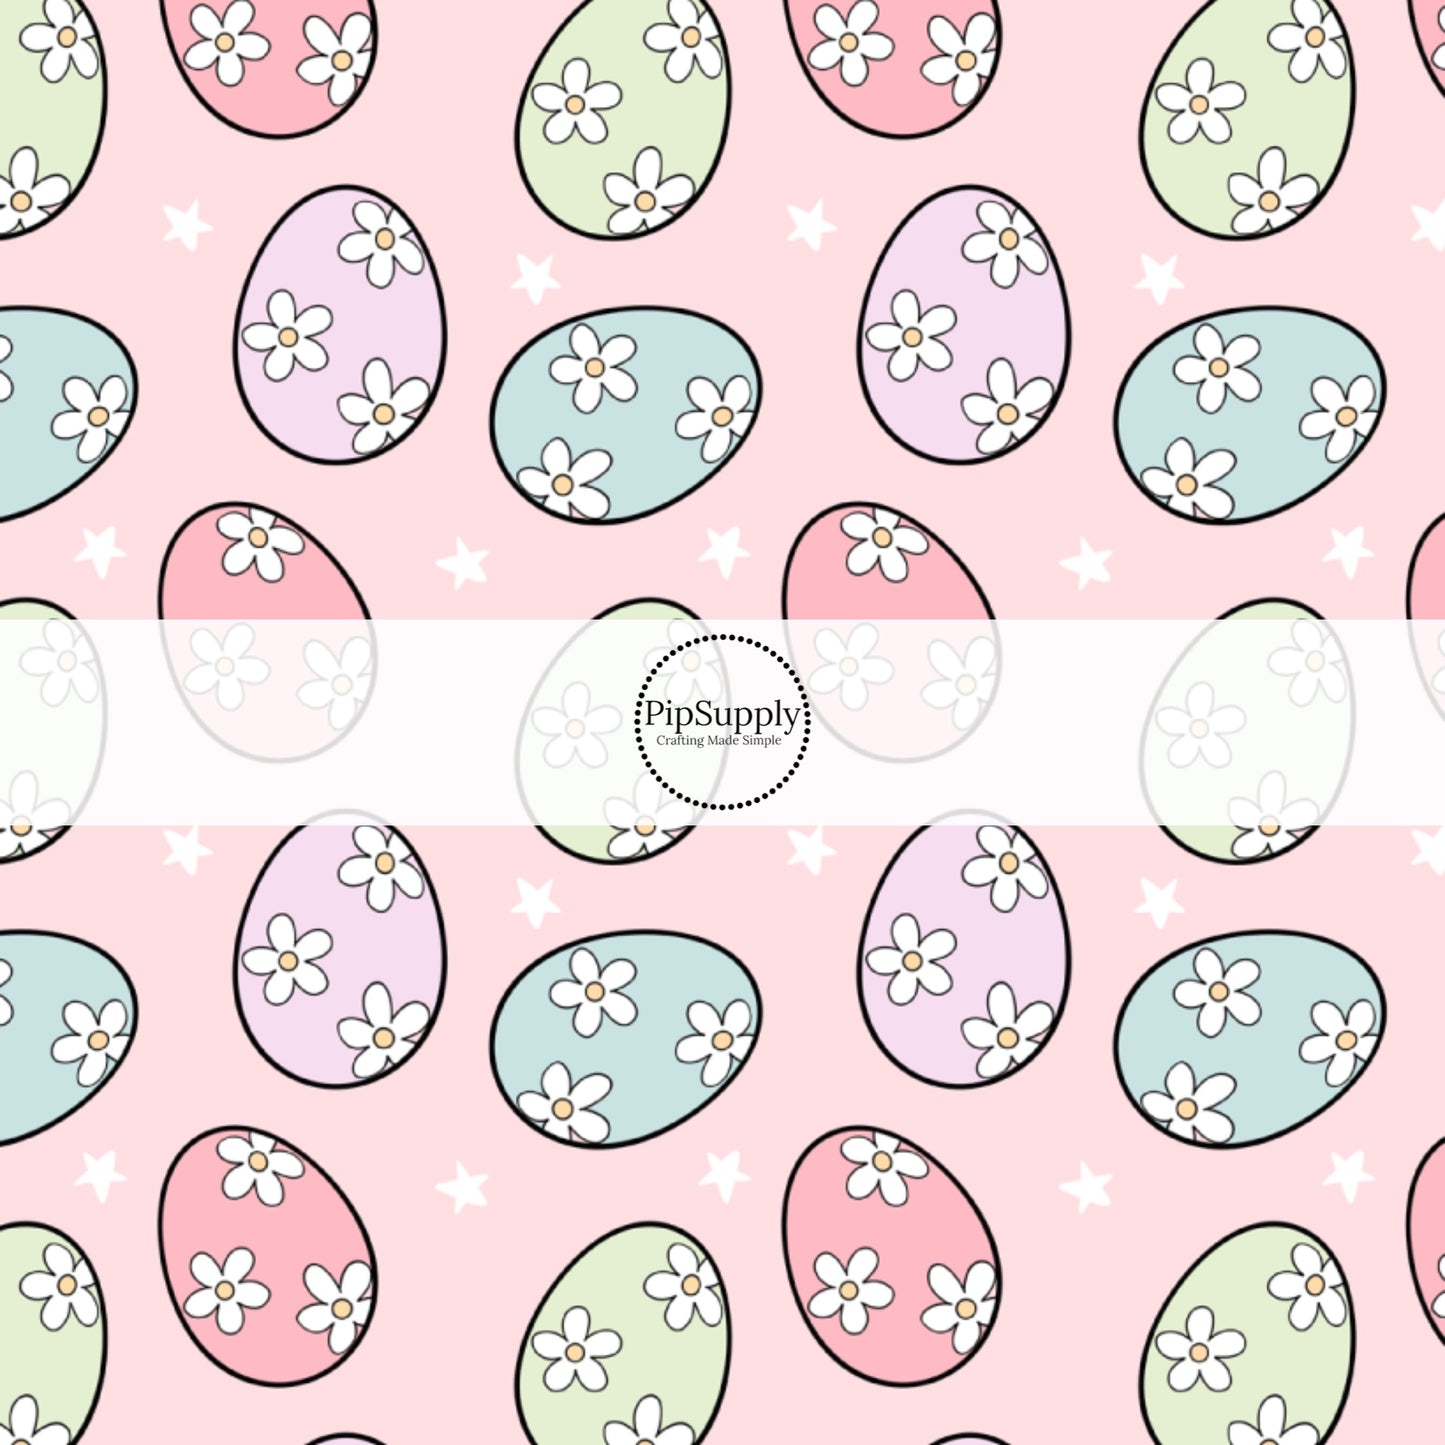 These spring patterned headband kits are easy to assemble and come with everything you need to make your own knotted headband. These kits include a custom printed and sewn fabric strip and a coordinating velvet headband. This cute pattern features pastel colored Easter eggs with white daisies on light pink.